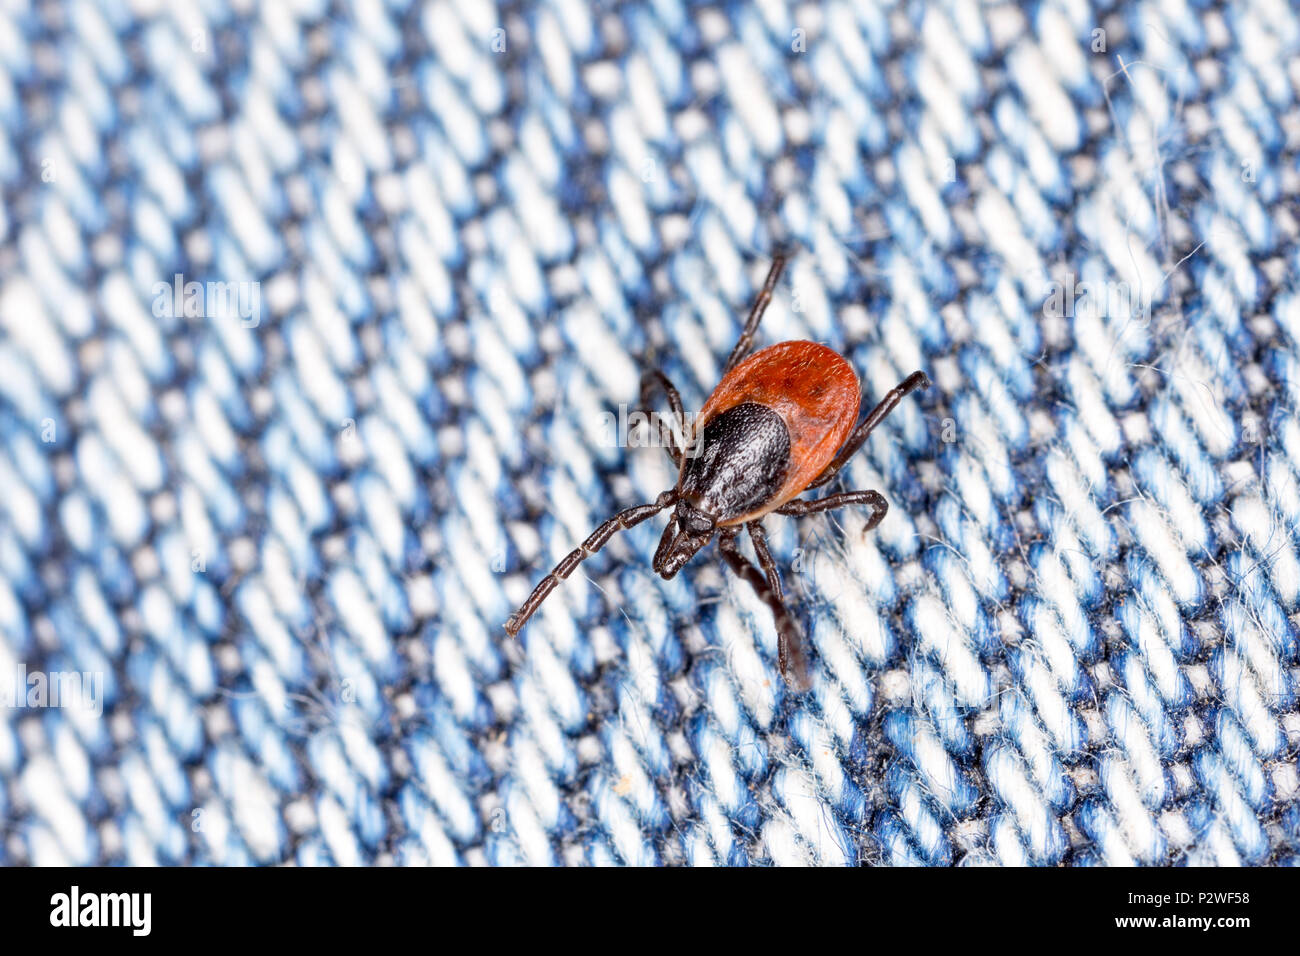 A female tick, Ixodes ricinus, found crawling on jeans after the wearer had been walking through long grass where deer and other mammals are present.  Stock Photo